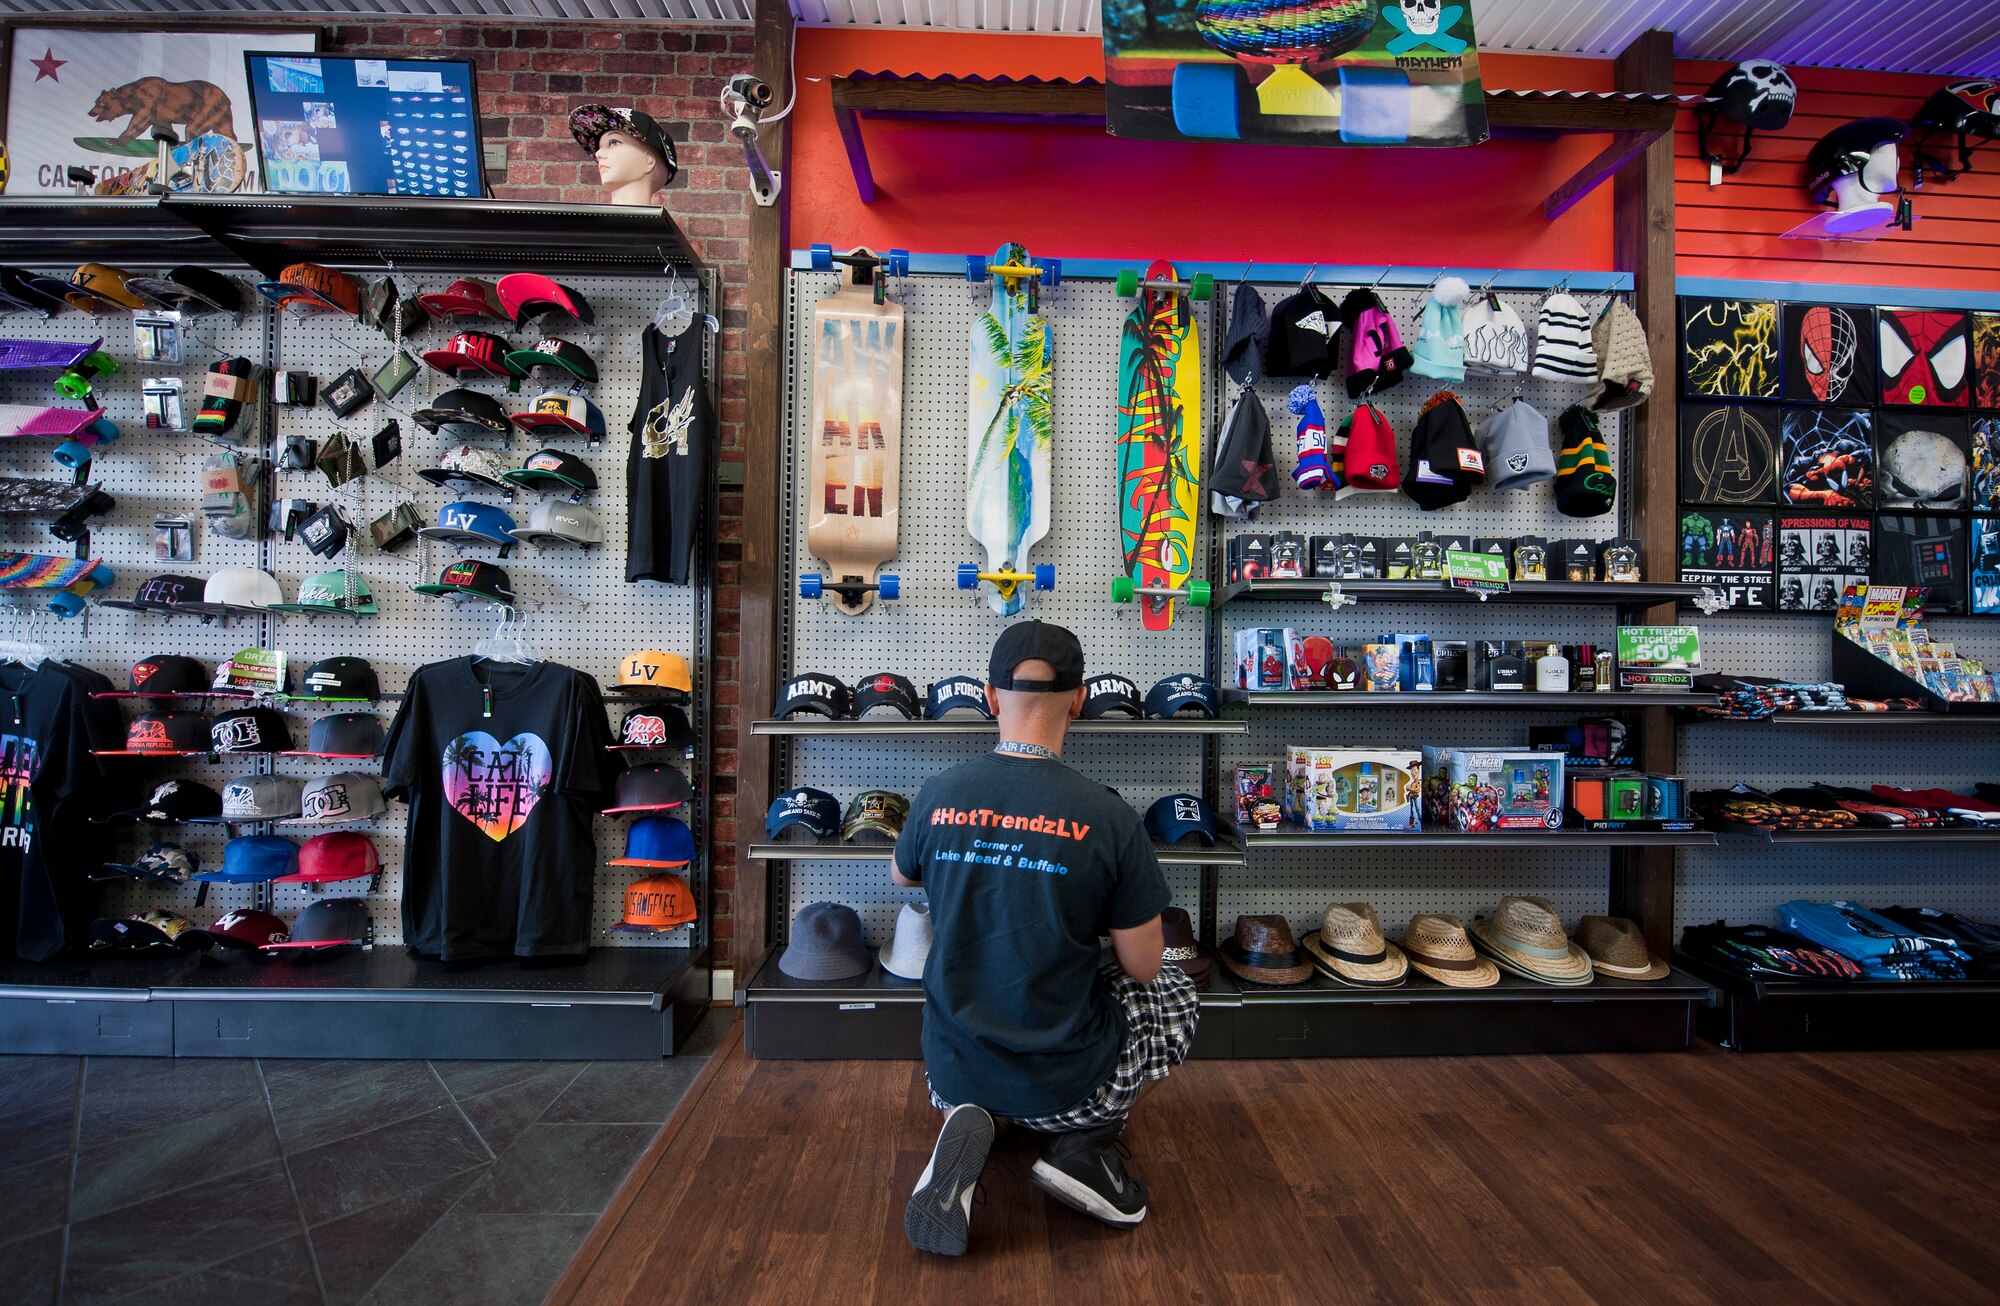 Retired Tech. Sgt. Alfredo Sibucao Jr. organizes a hat display inside his retail store in Las Vegas, June 22, 2015. Sibucao, who attended middle and high school in Las Vegas, spent a combined 13 years between Nellis and Creech Air Force Bases before retiring and opening his business in Las Vegas. (U.S. Air Force photo by Staff Sgt. Siuta B. Ika)